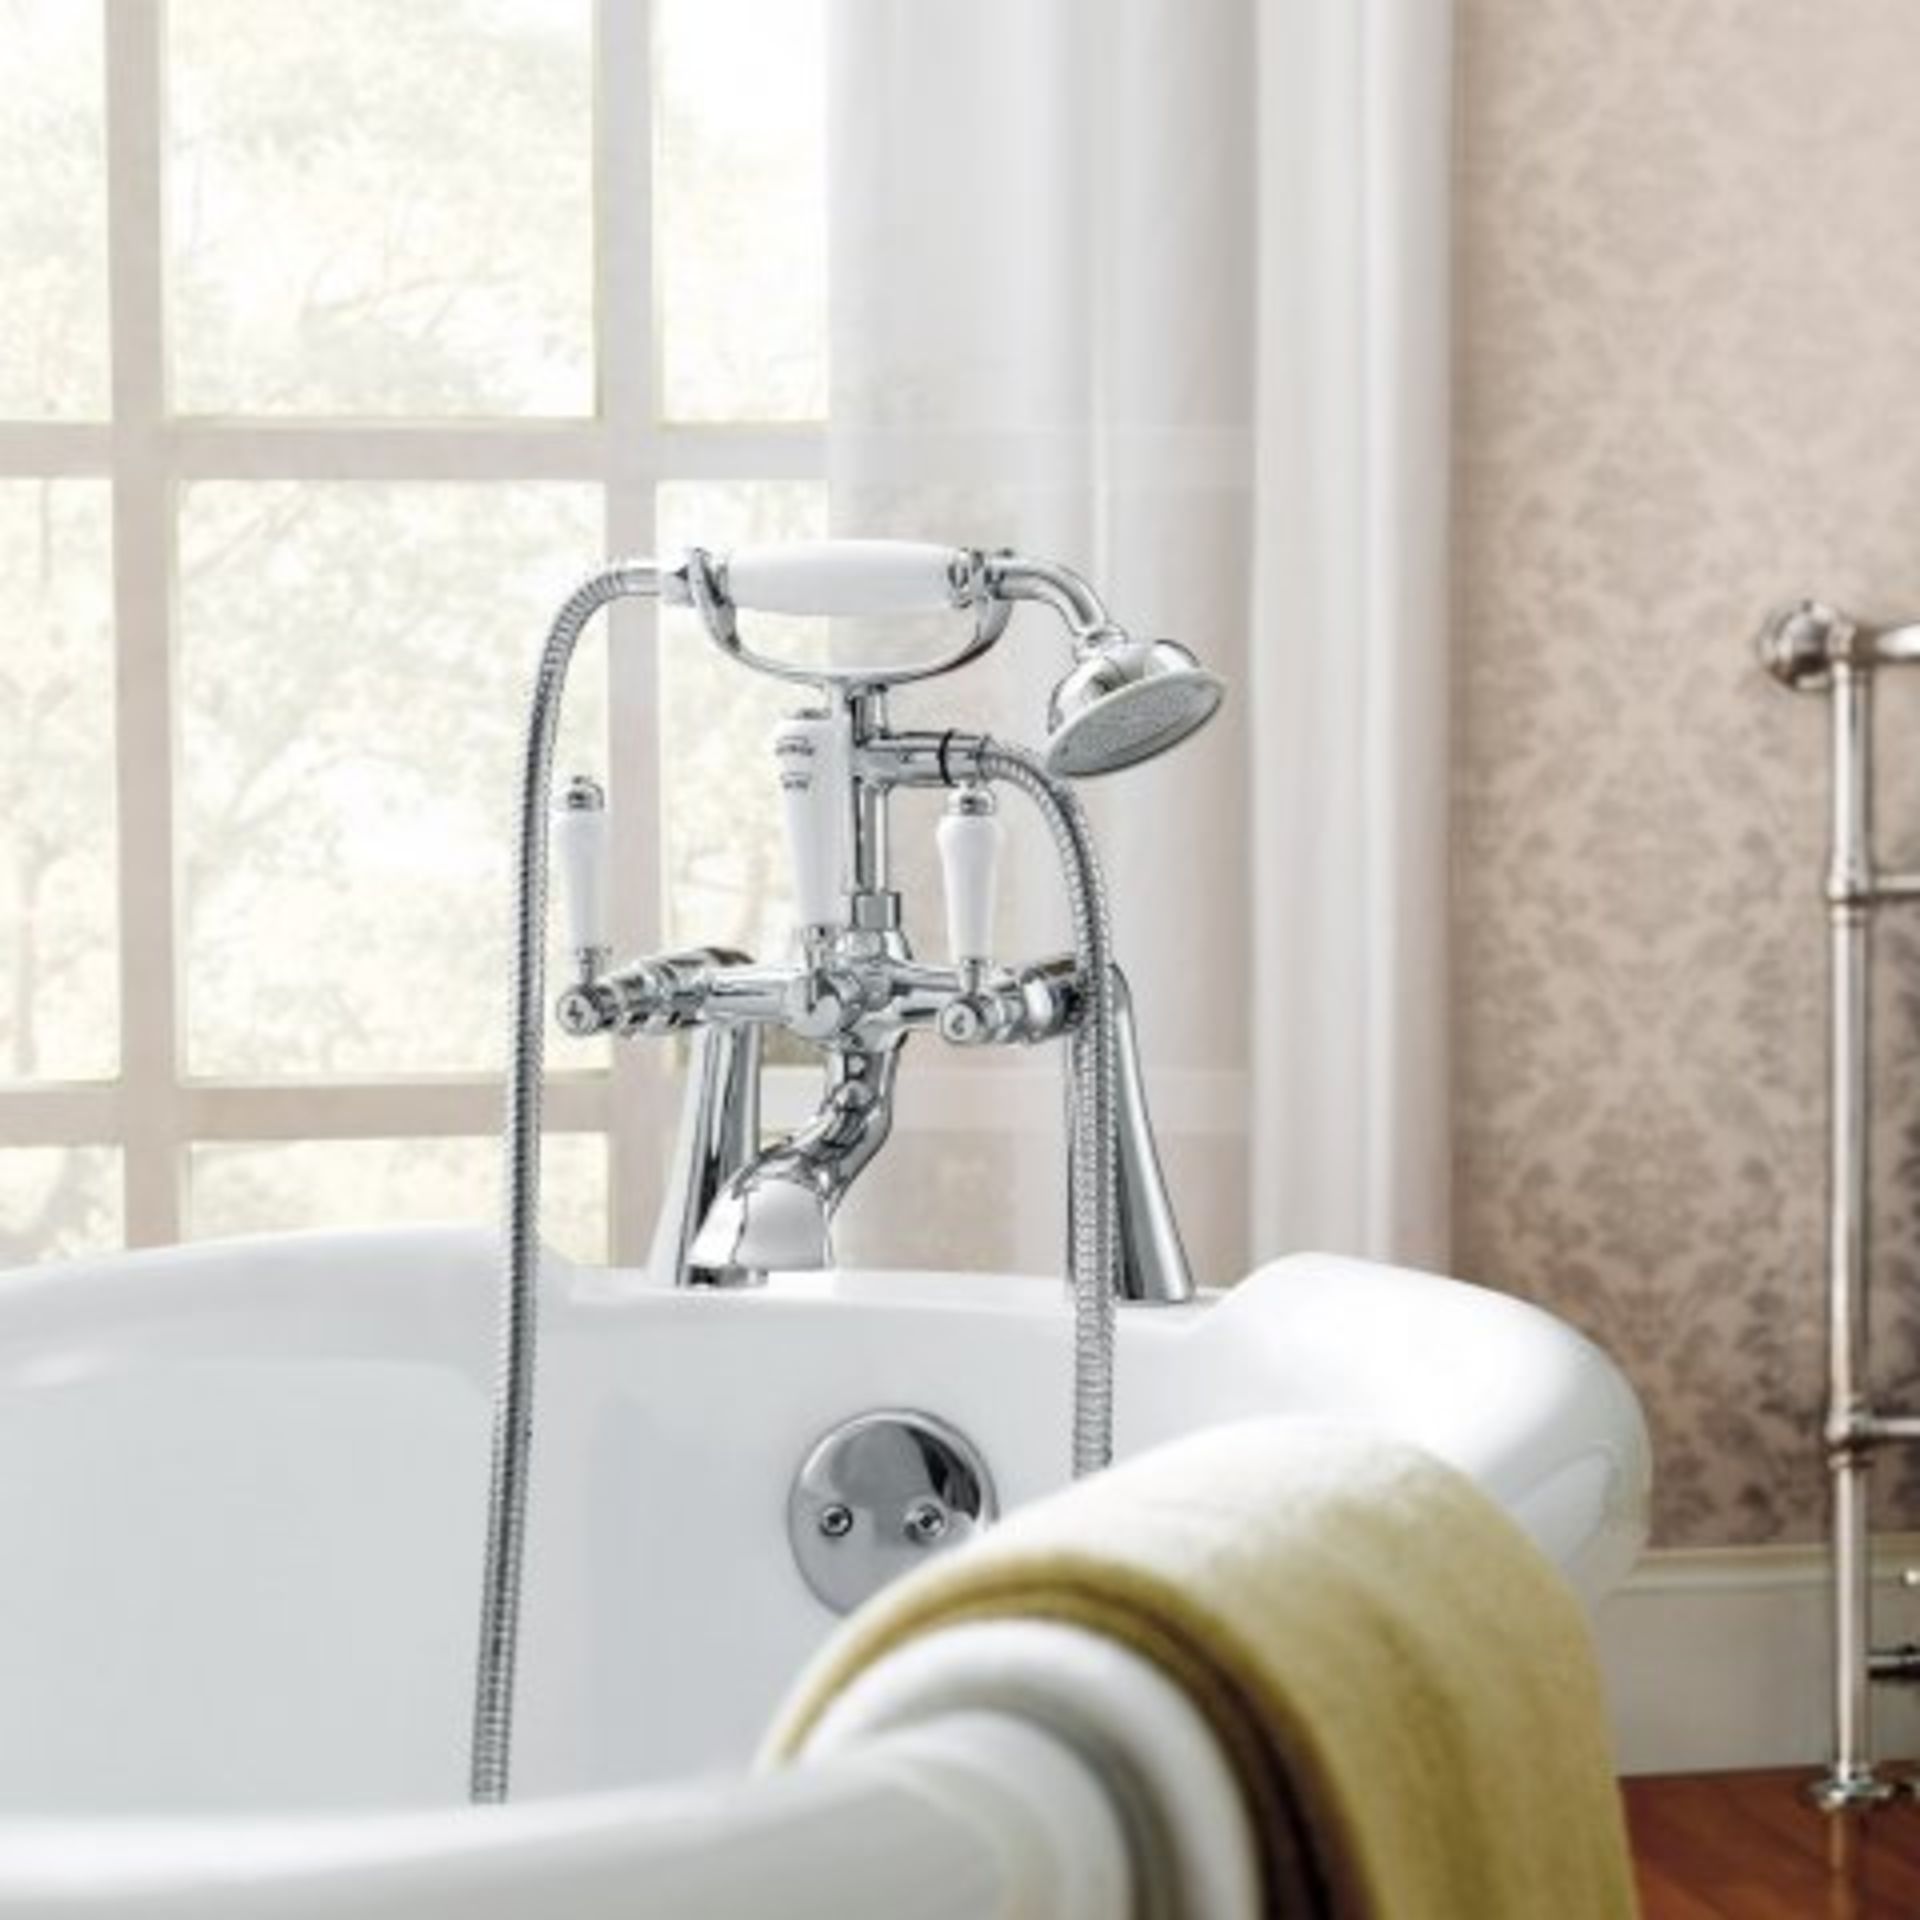 (I61) Regal Chrome Traditional Bath Mixer Lever Tap with Hand Held Shower RRP £199.99 Vintage - Image 2 of 3